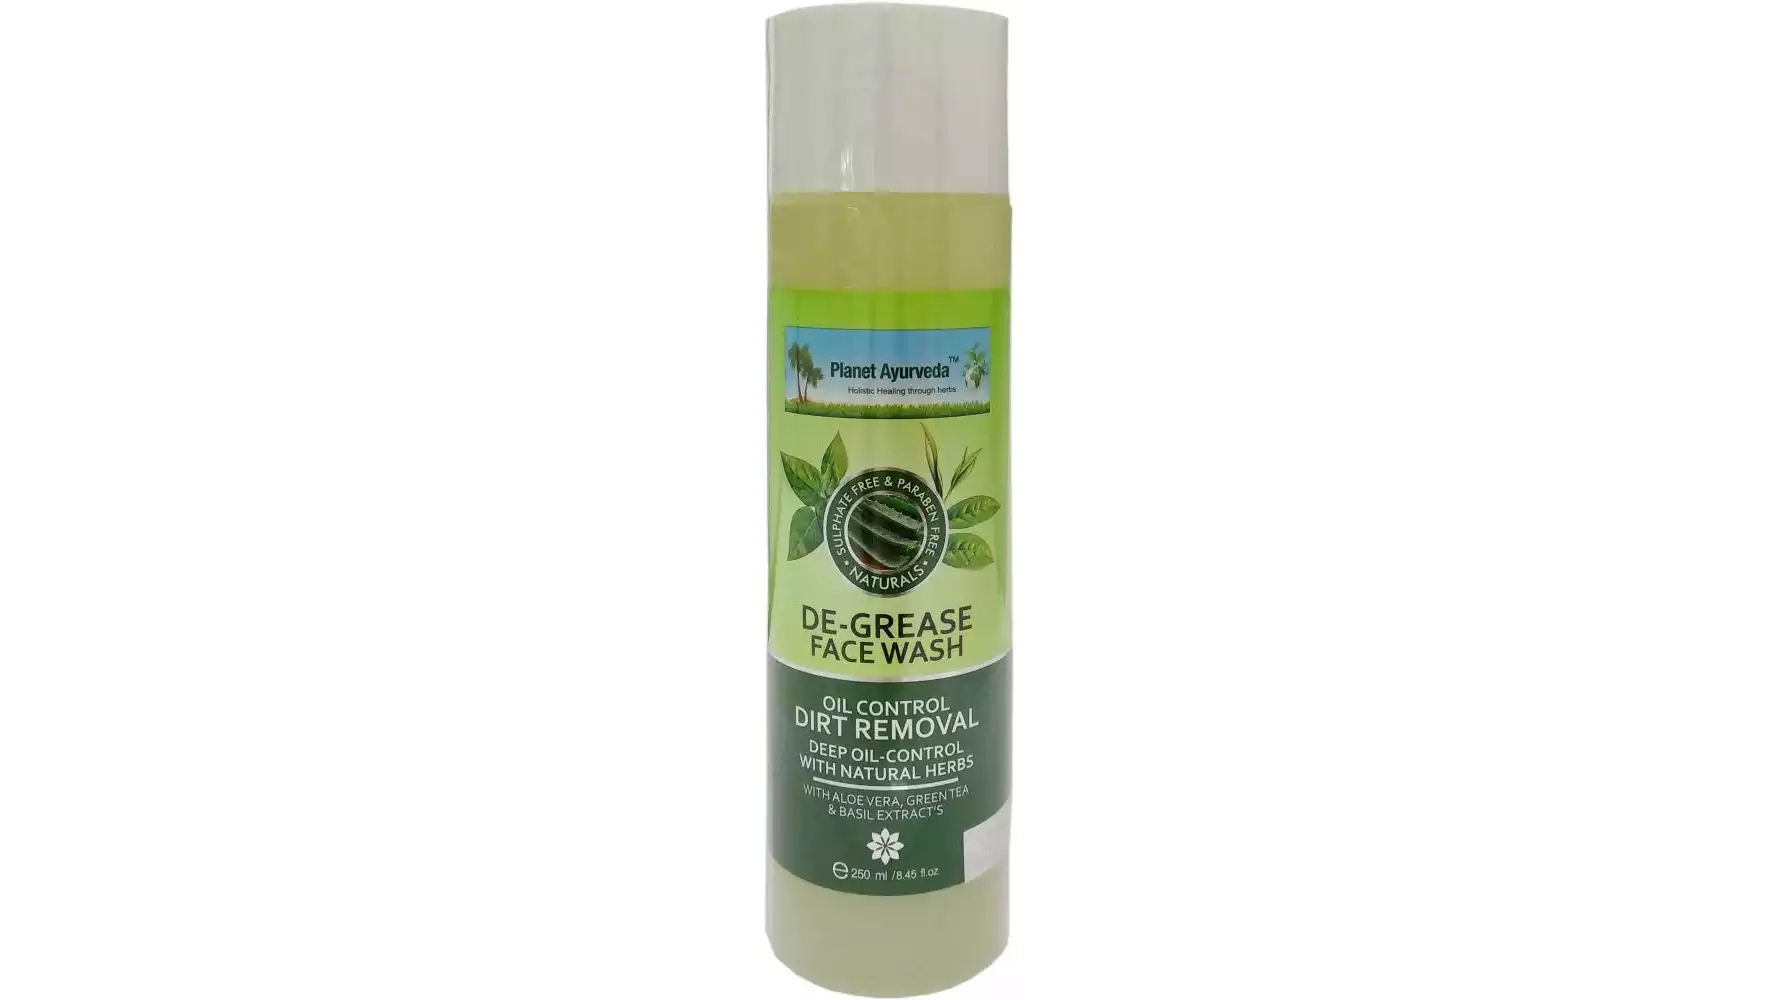 Planet Ayurveda De Grease Face Wash (250ml, Pack of 2)